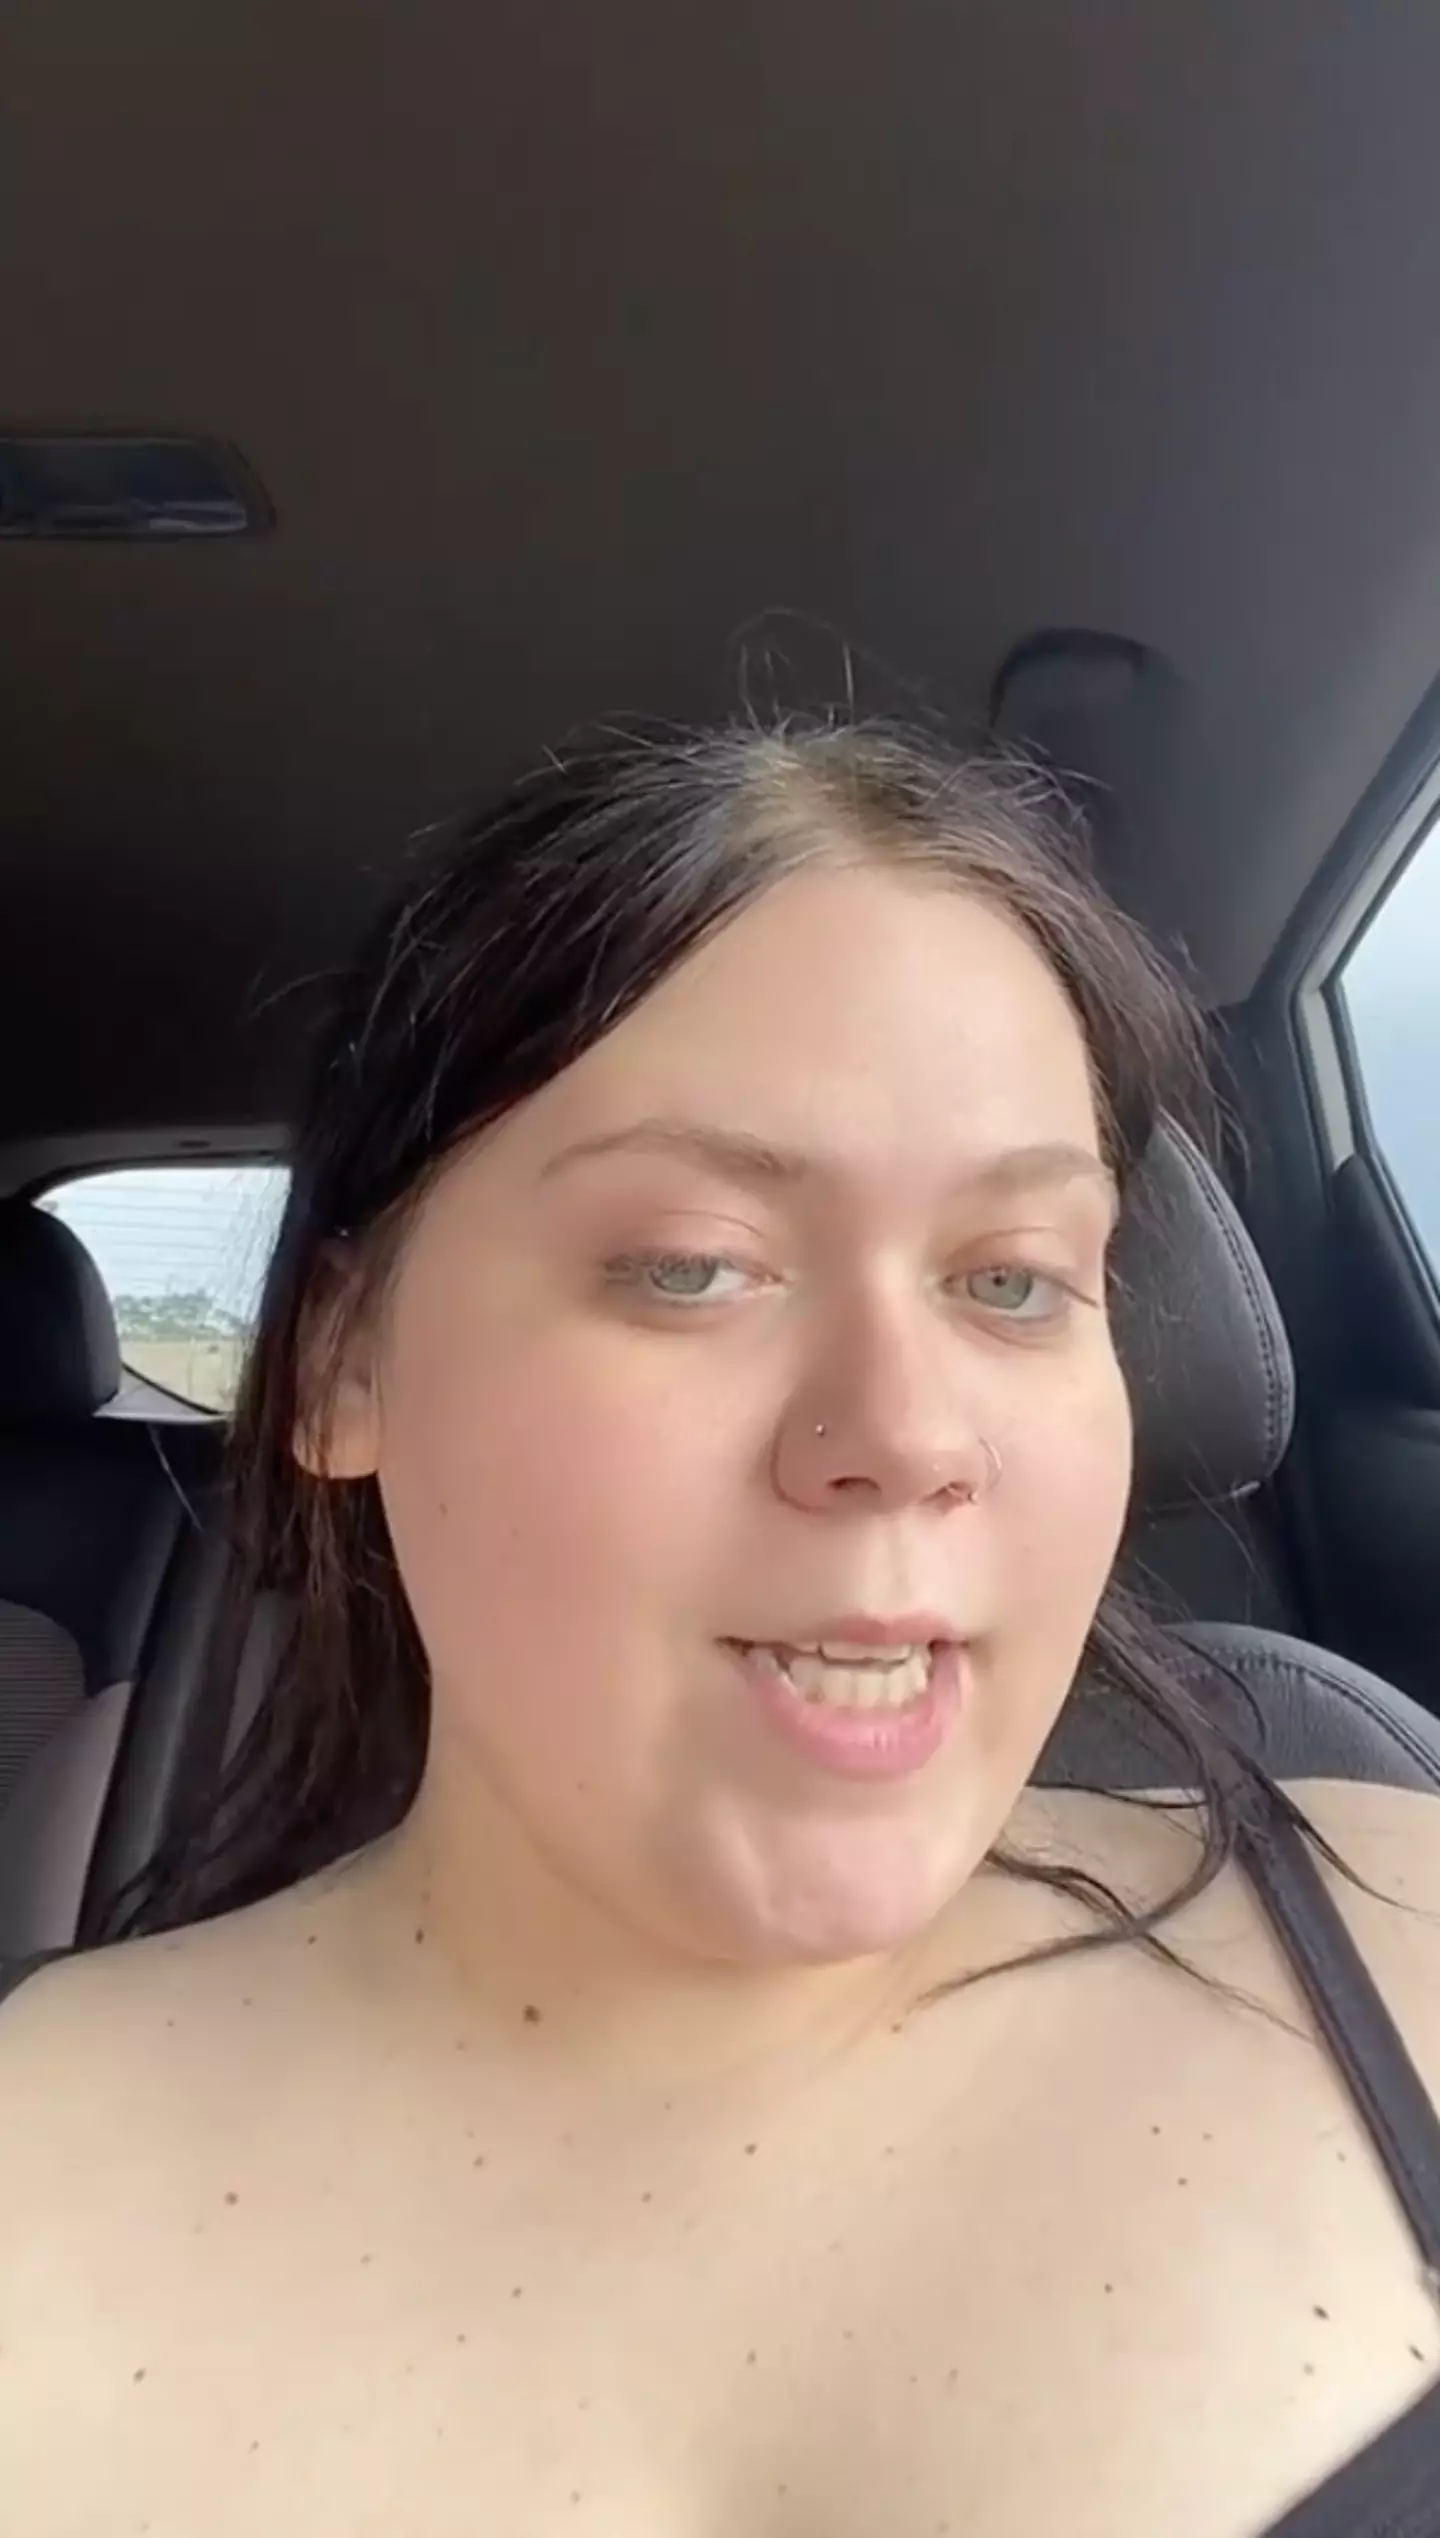 Abigayle Canterbury shared a TikTok video explaining what happened.